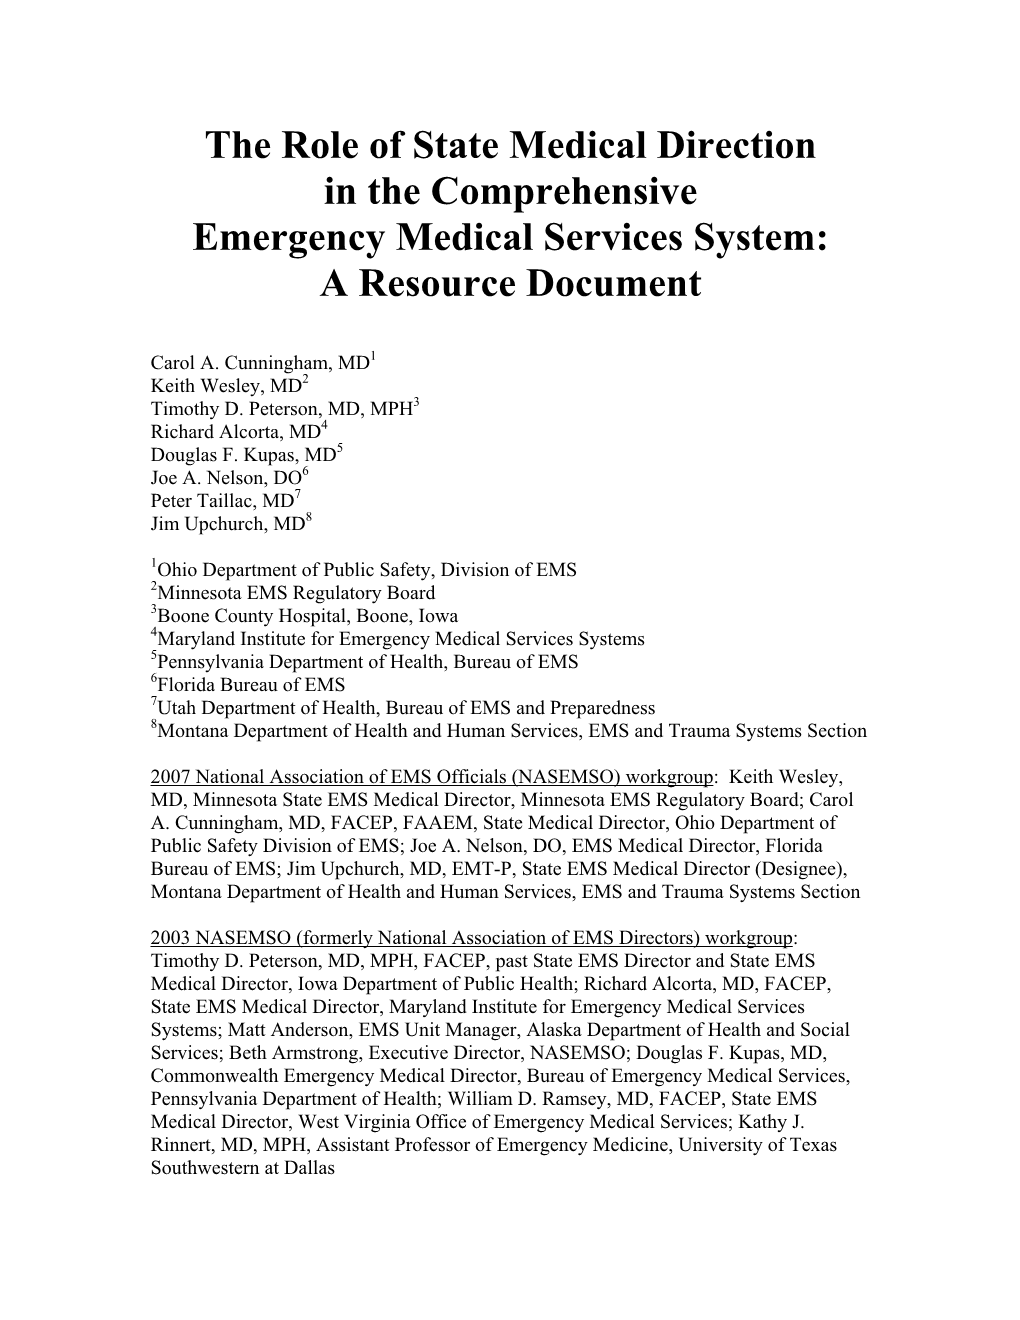 The Role of State Medical Direction in the Comprehensive Emergency Medical Services System: a Resource Document